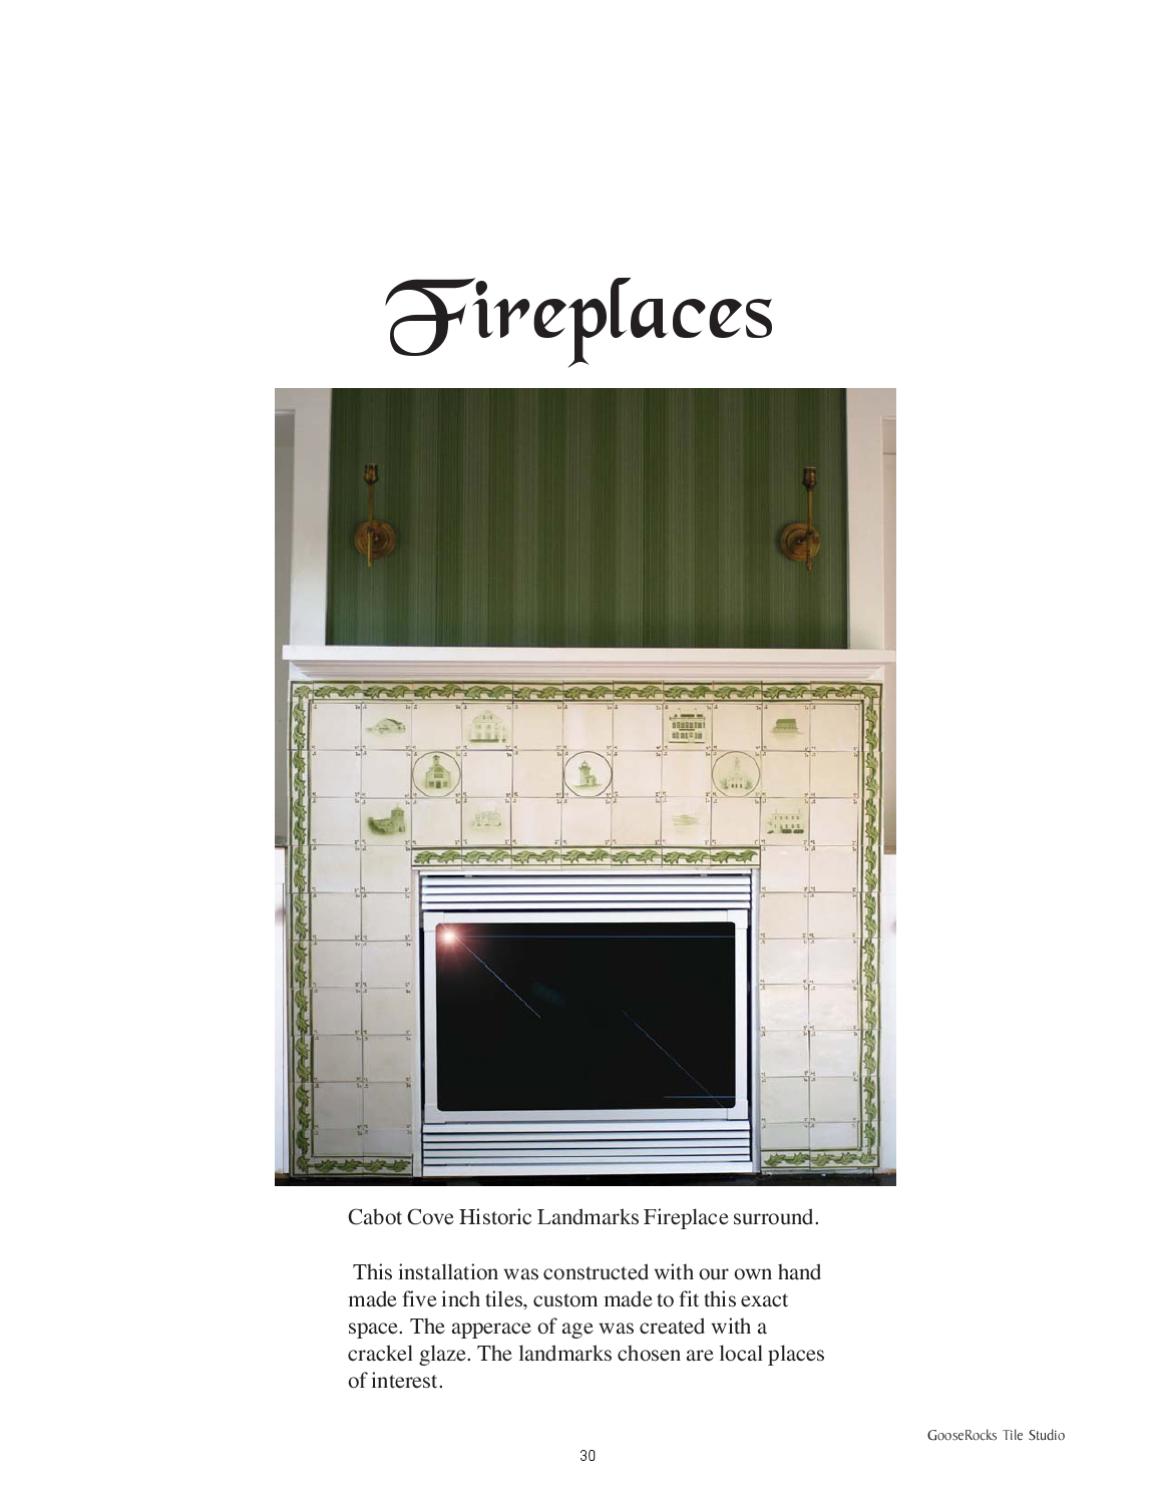 Fireplace Rocks Awesome Goose Rocks Tile Studio Fireplace Catalog by Mcmoto Concepts